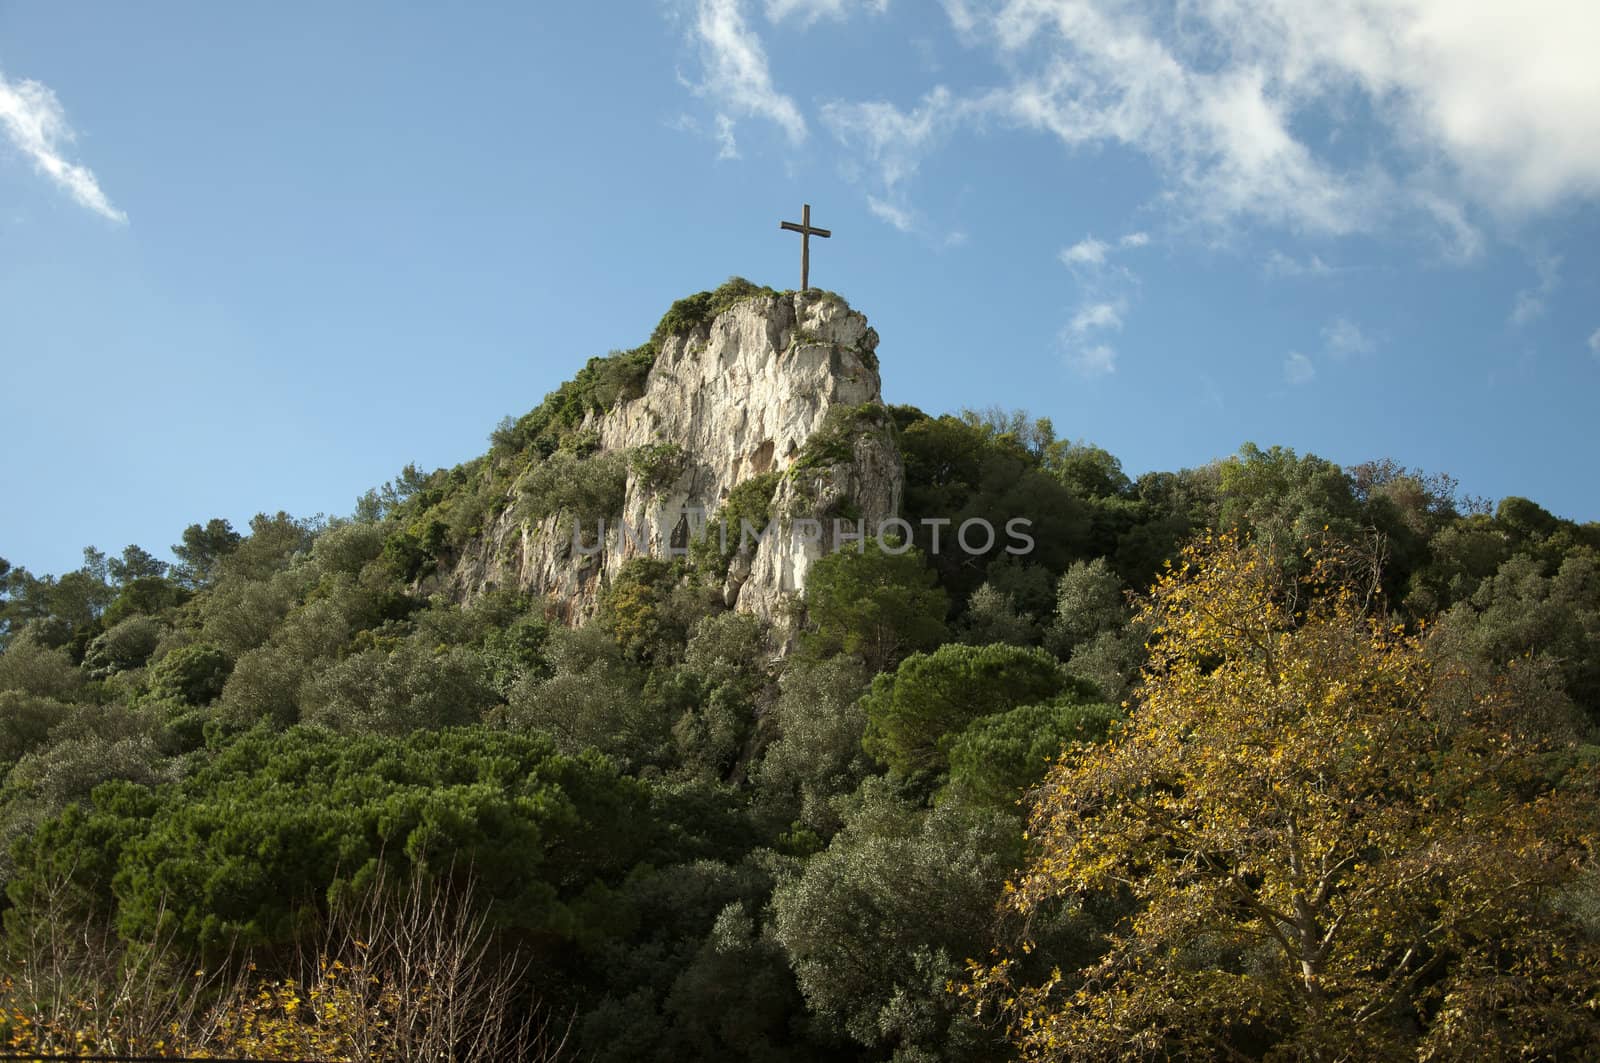 Portugal at the top of the mountain is a very long time, this cross